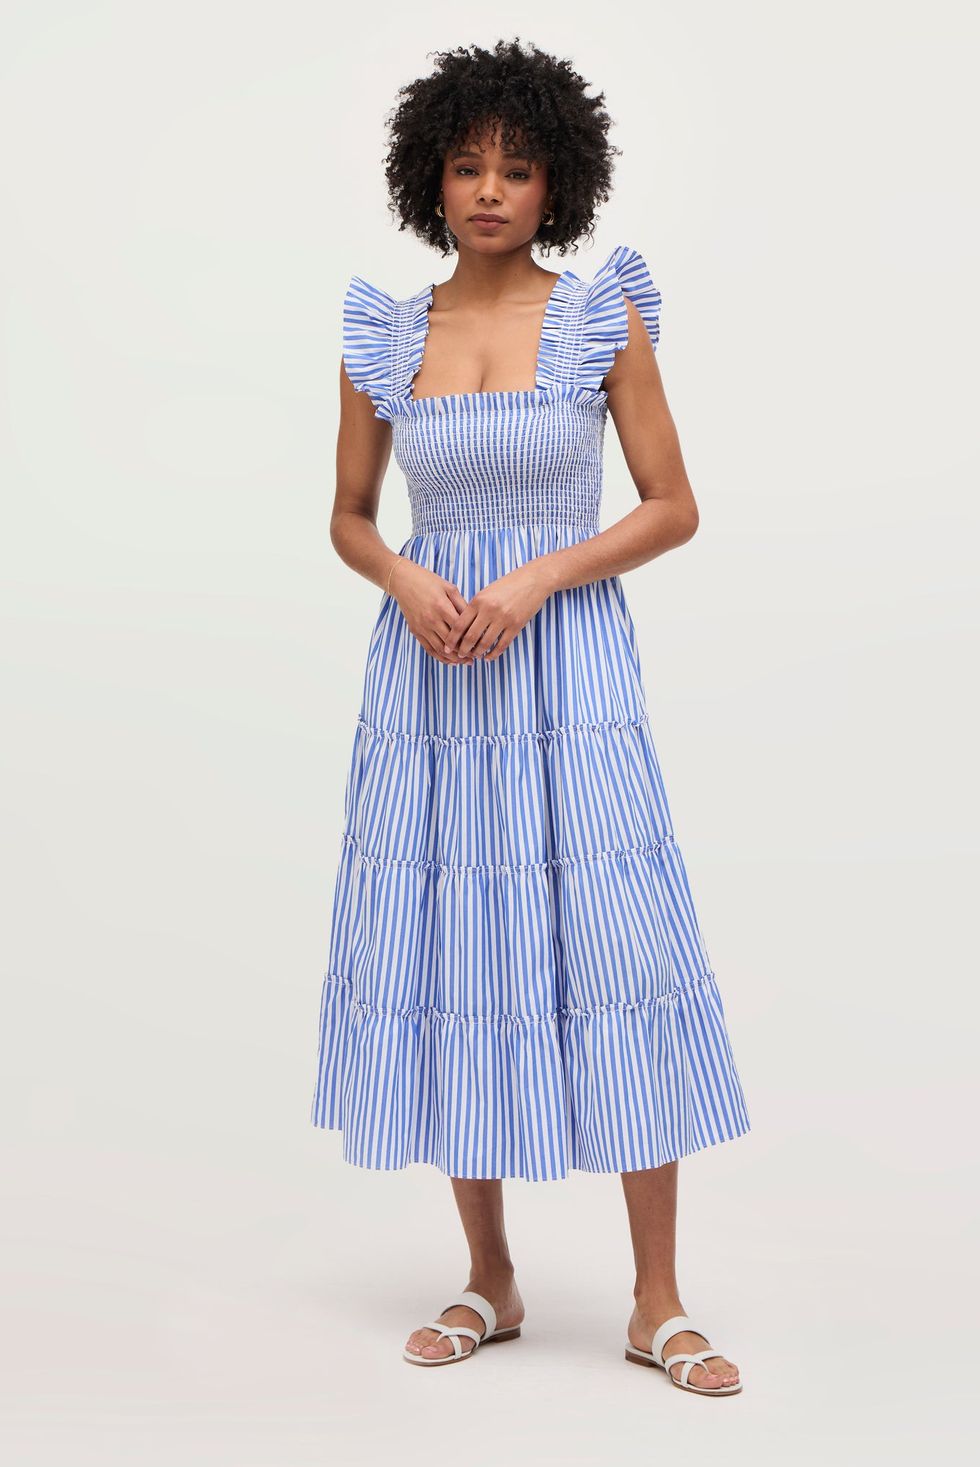 Vacation Dresses  The Perfect Get-Away Dress for Any Destination